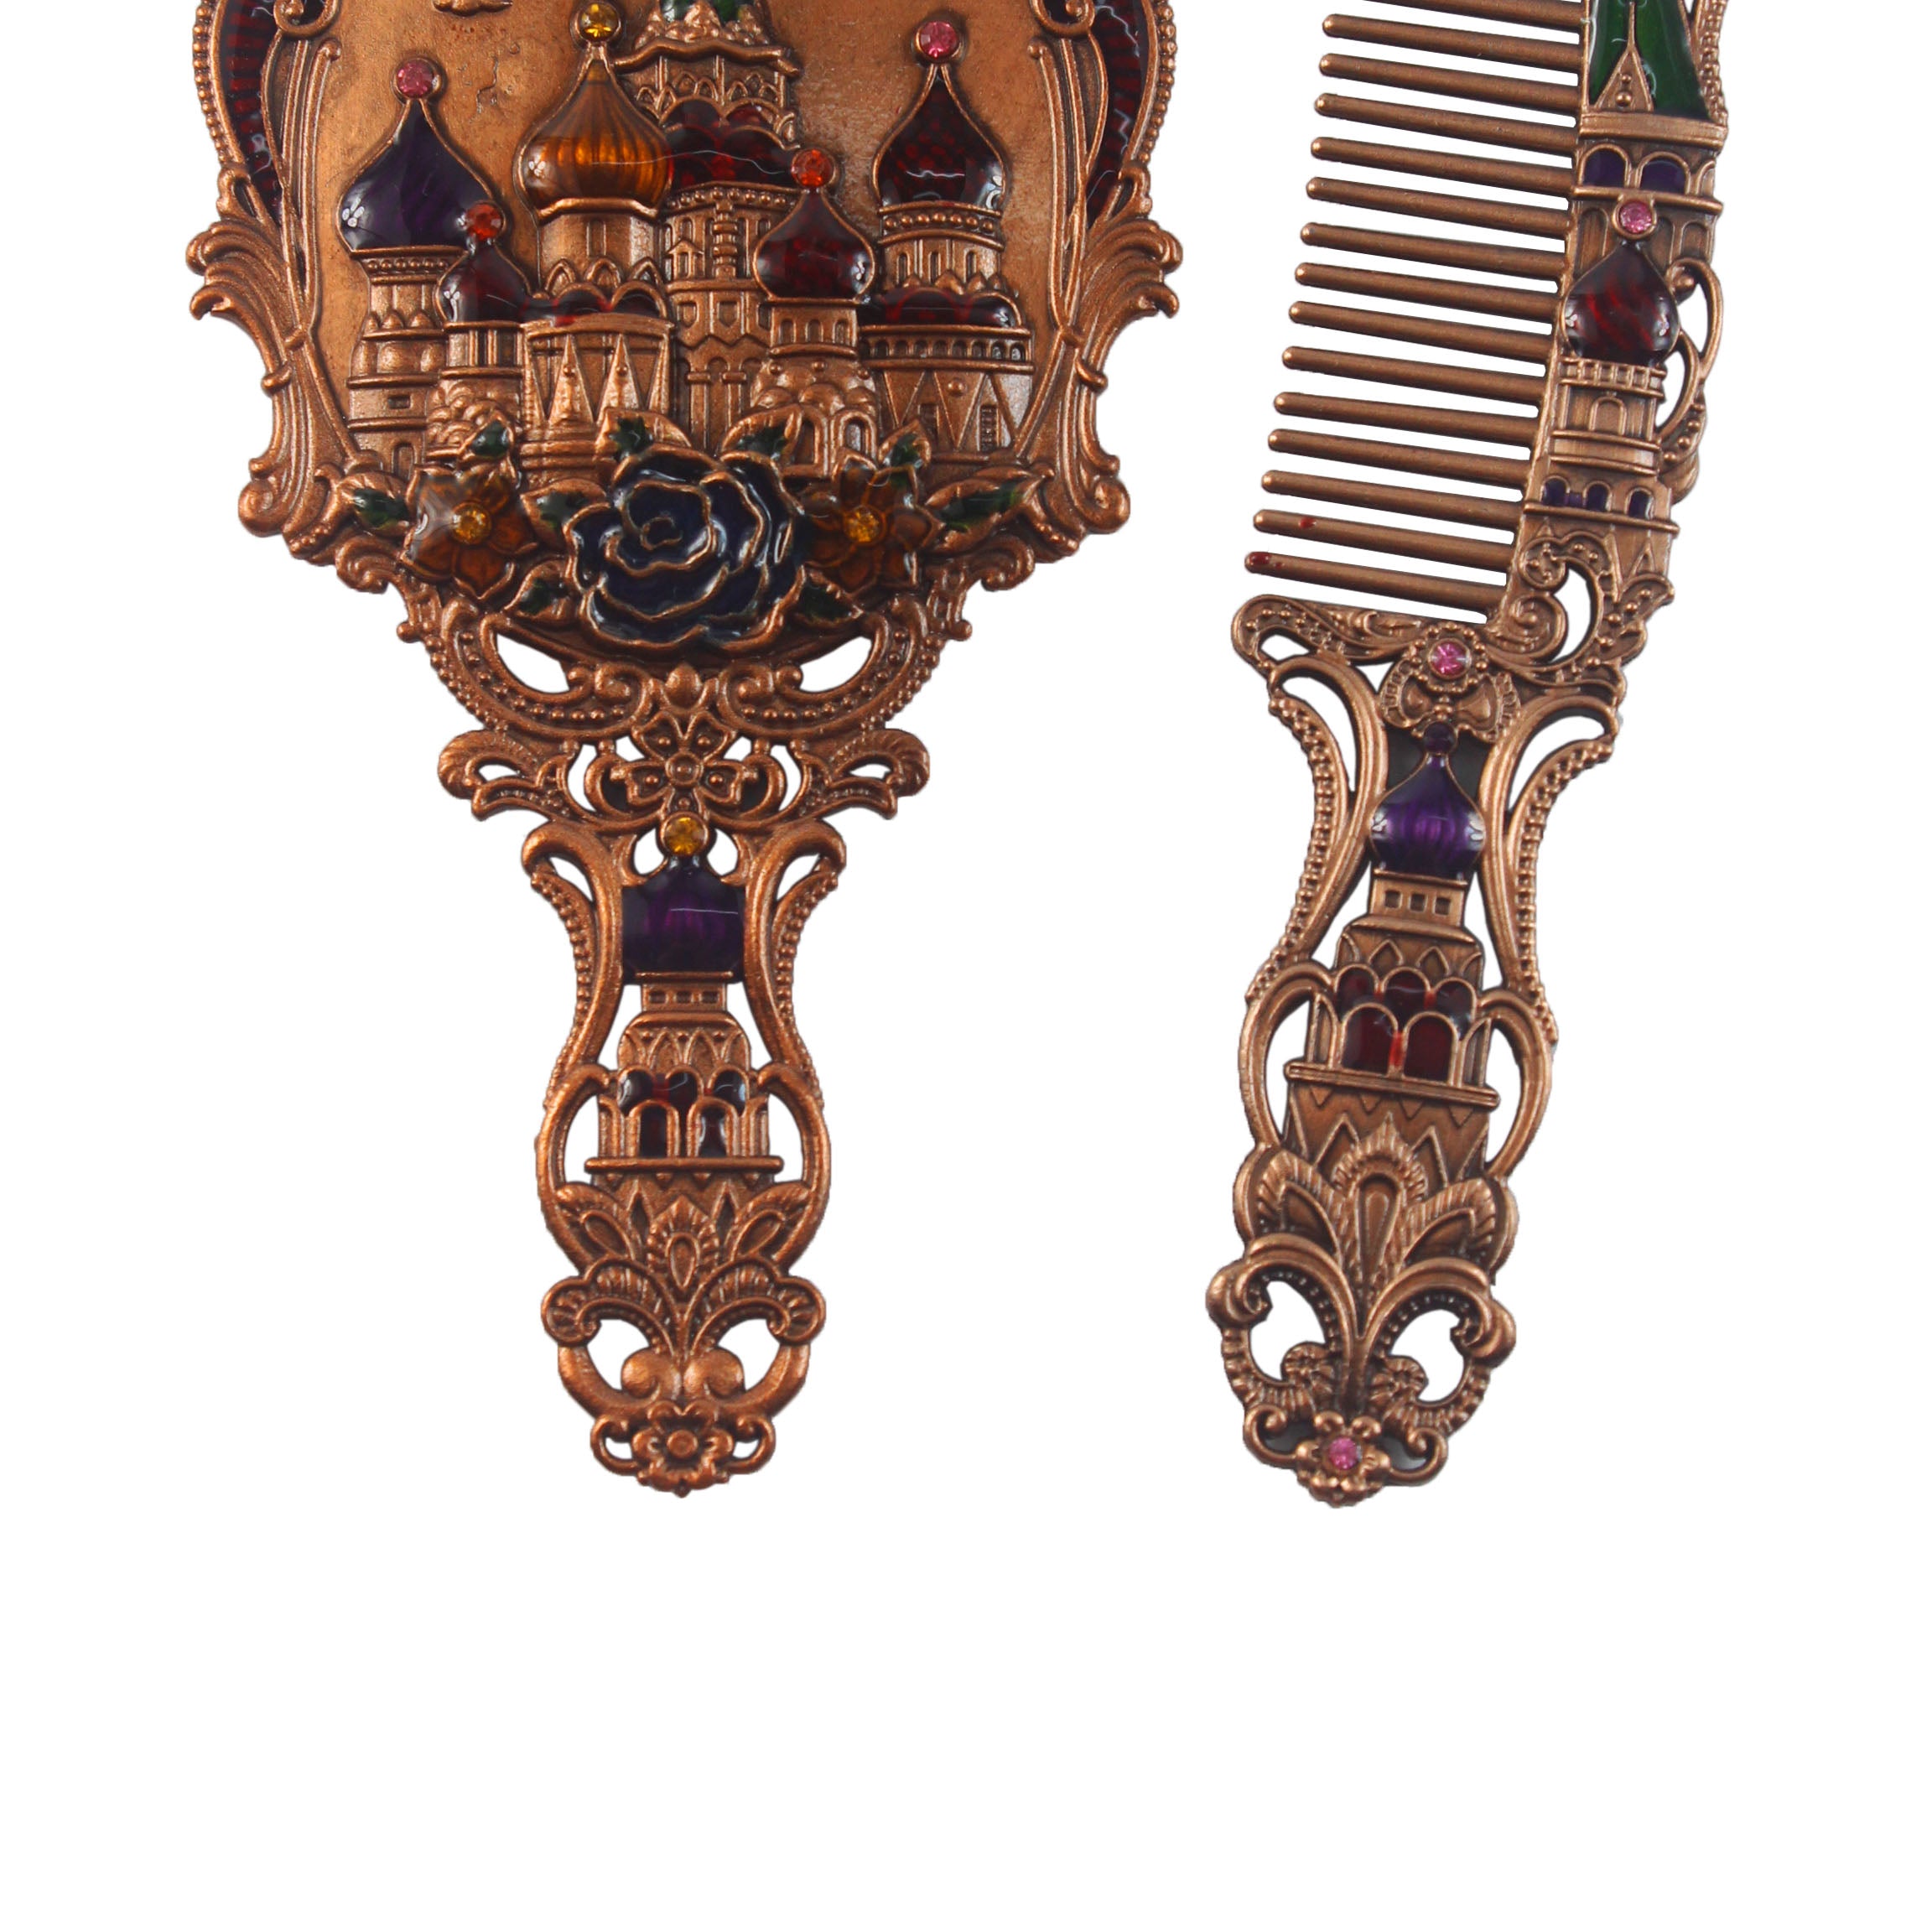 Small Size Castle Mirror And Comb Set M0398